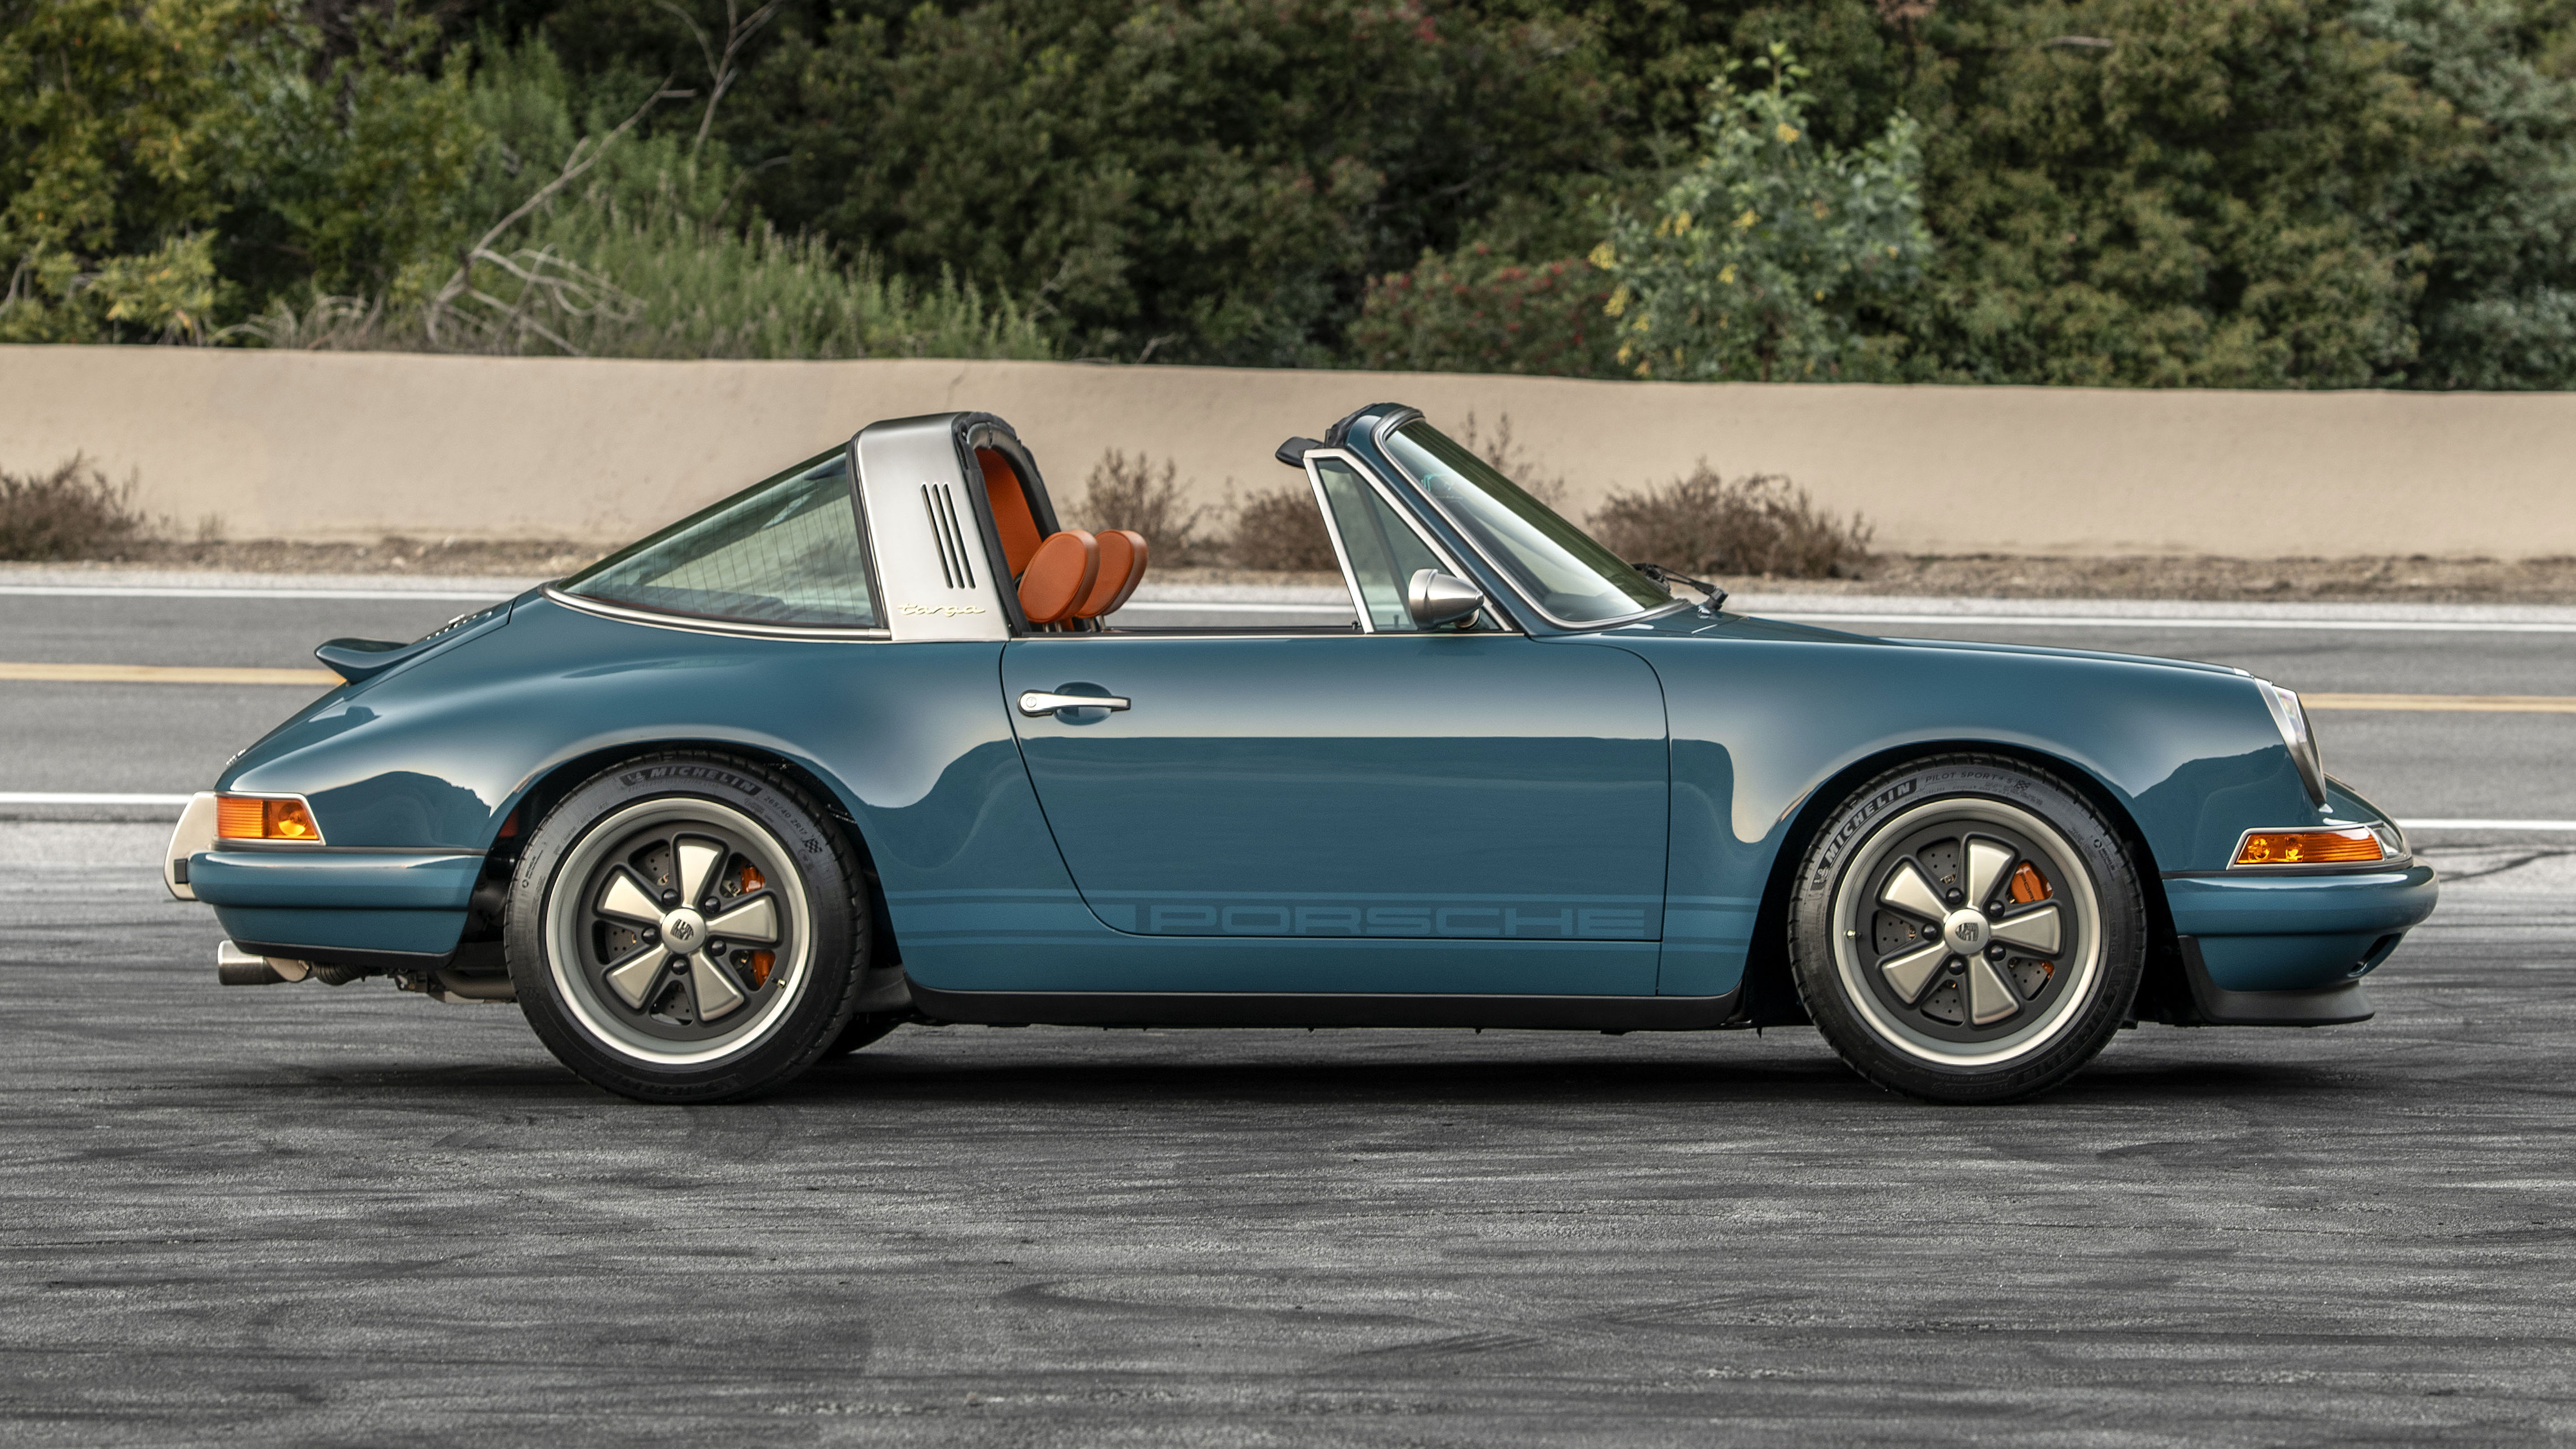 feast your eyes on singer’s 300th restoration: the targa-topped ‘sotto’